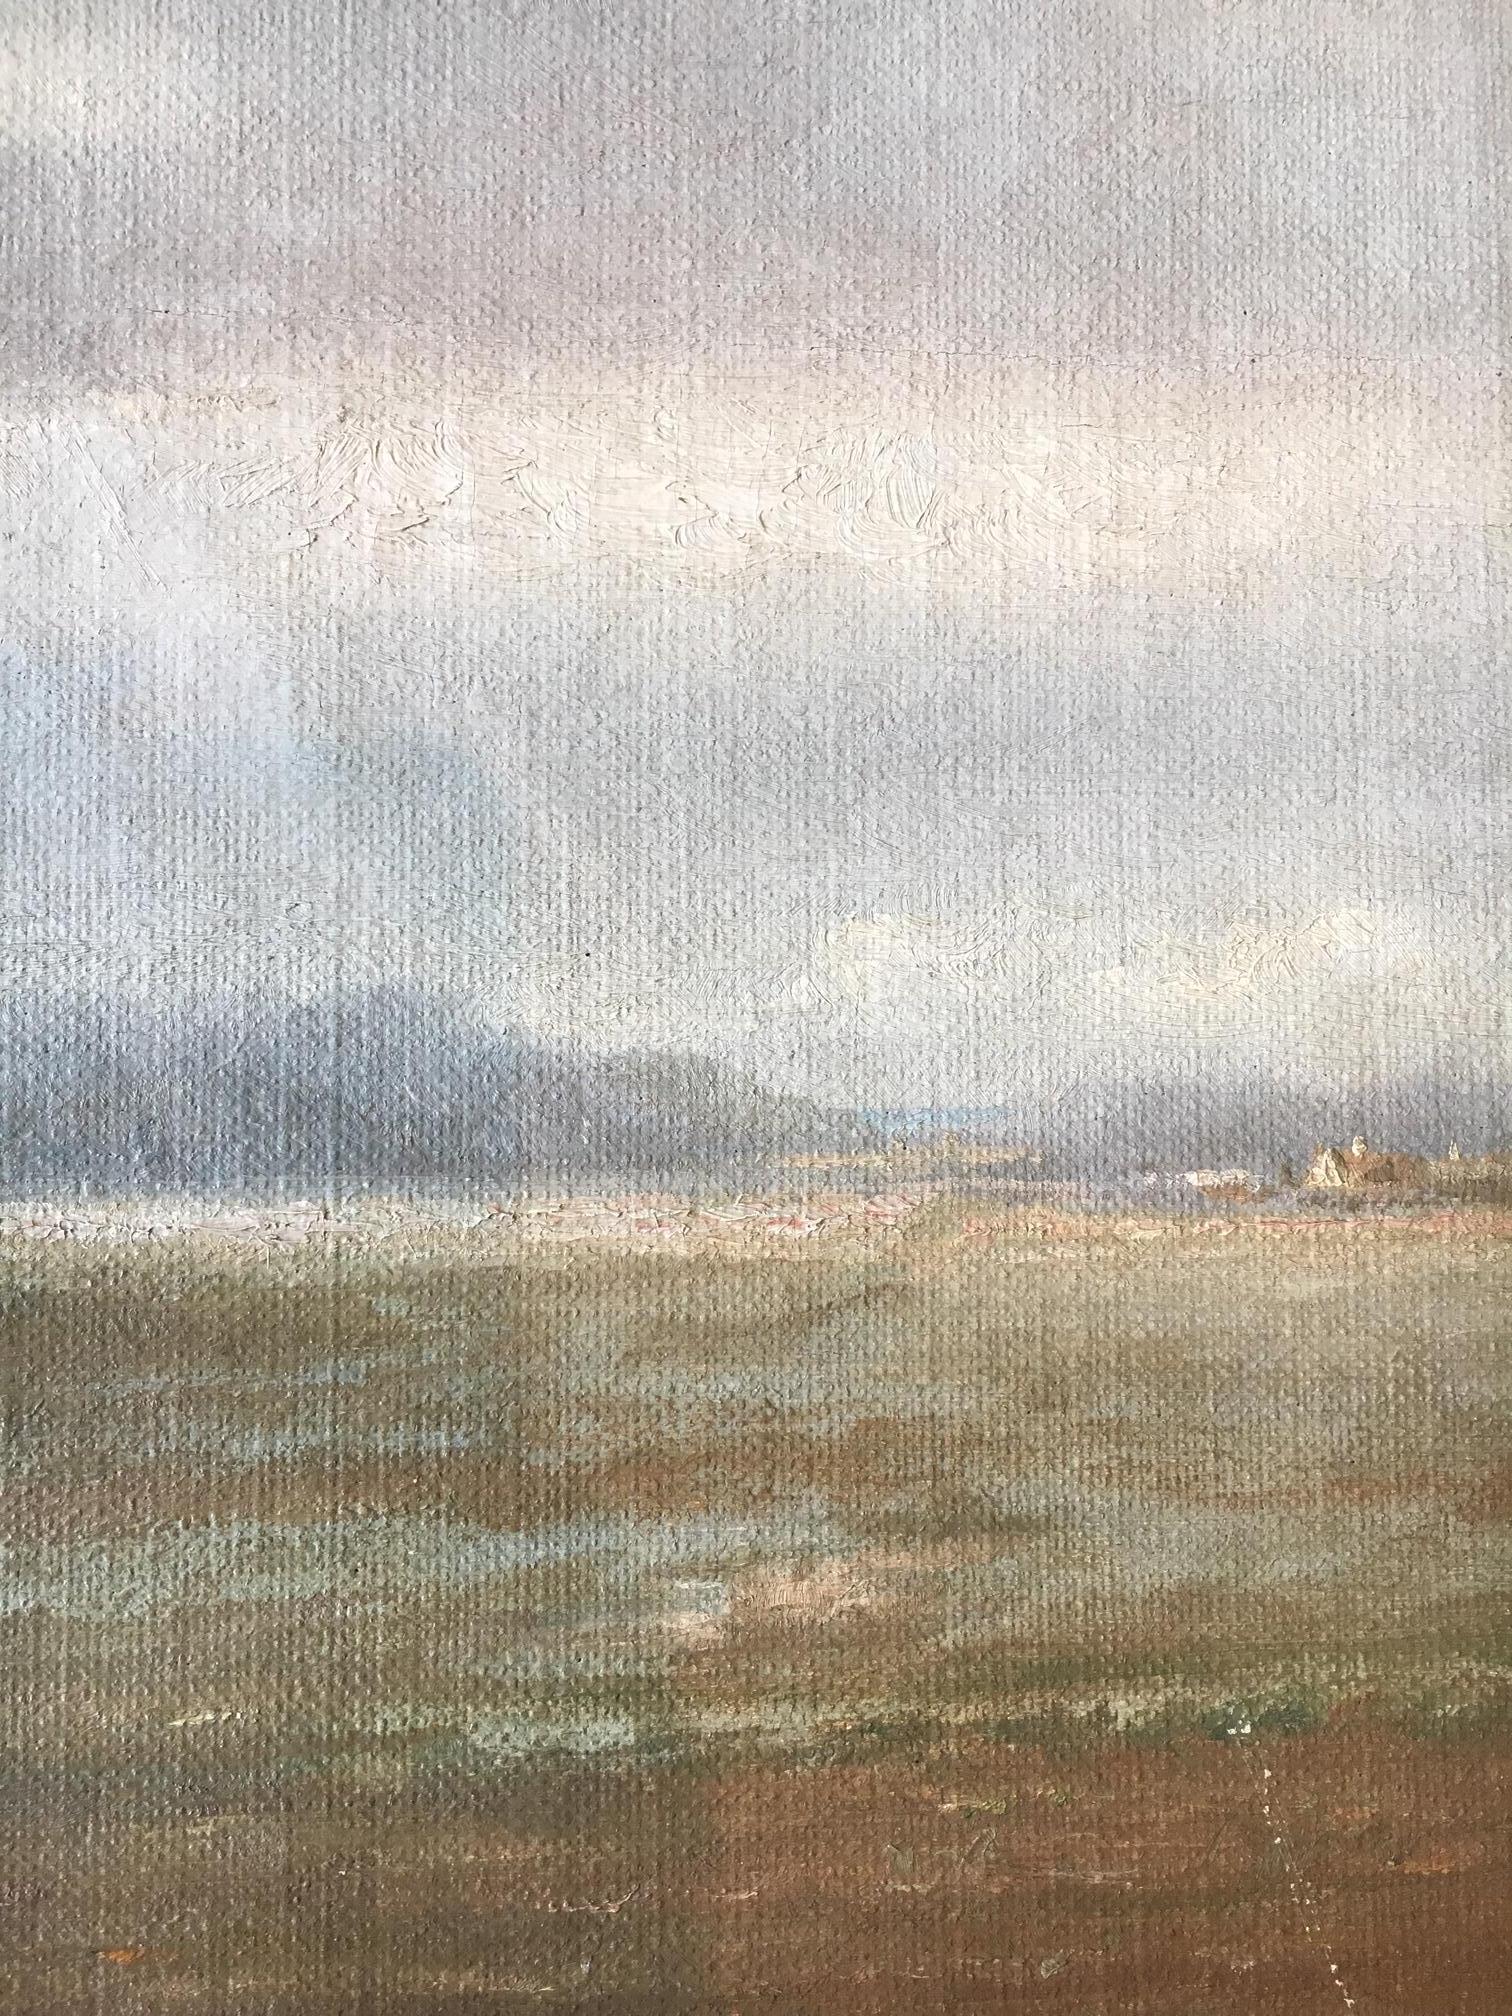 Beautiful misty landscape with sunlight filtering down on a farmhouse and field. Oil on canvas by H.C. Kliim, 1916.